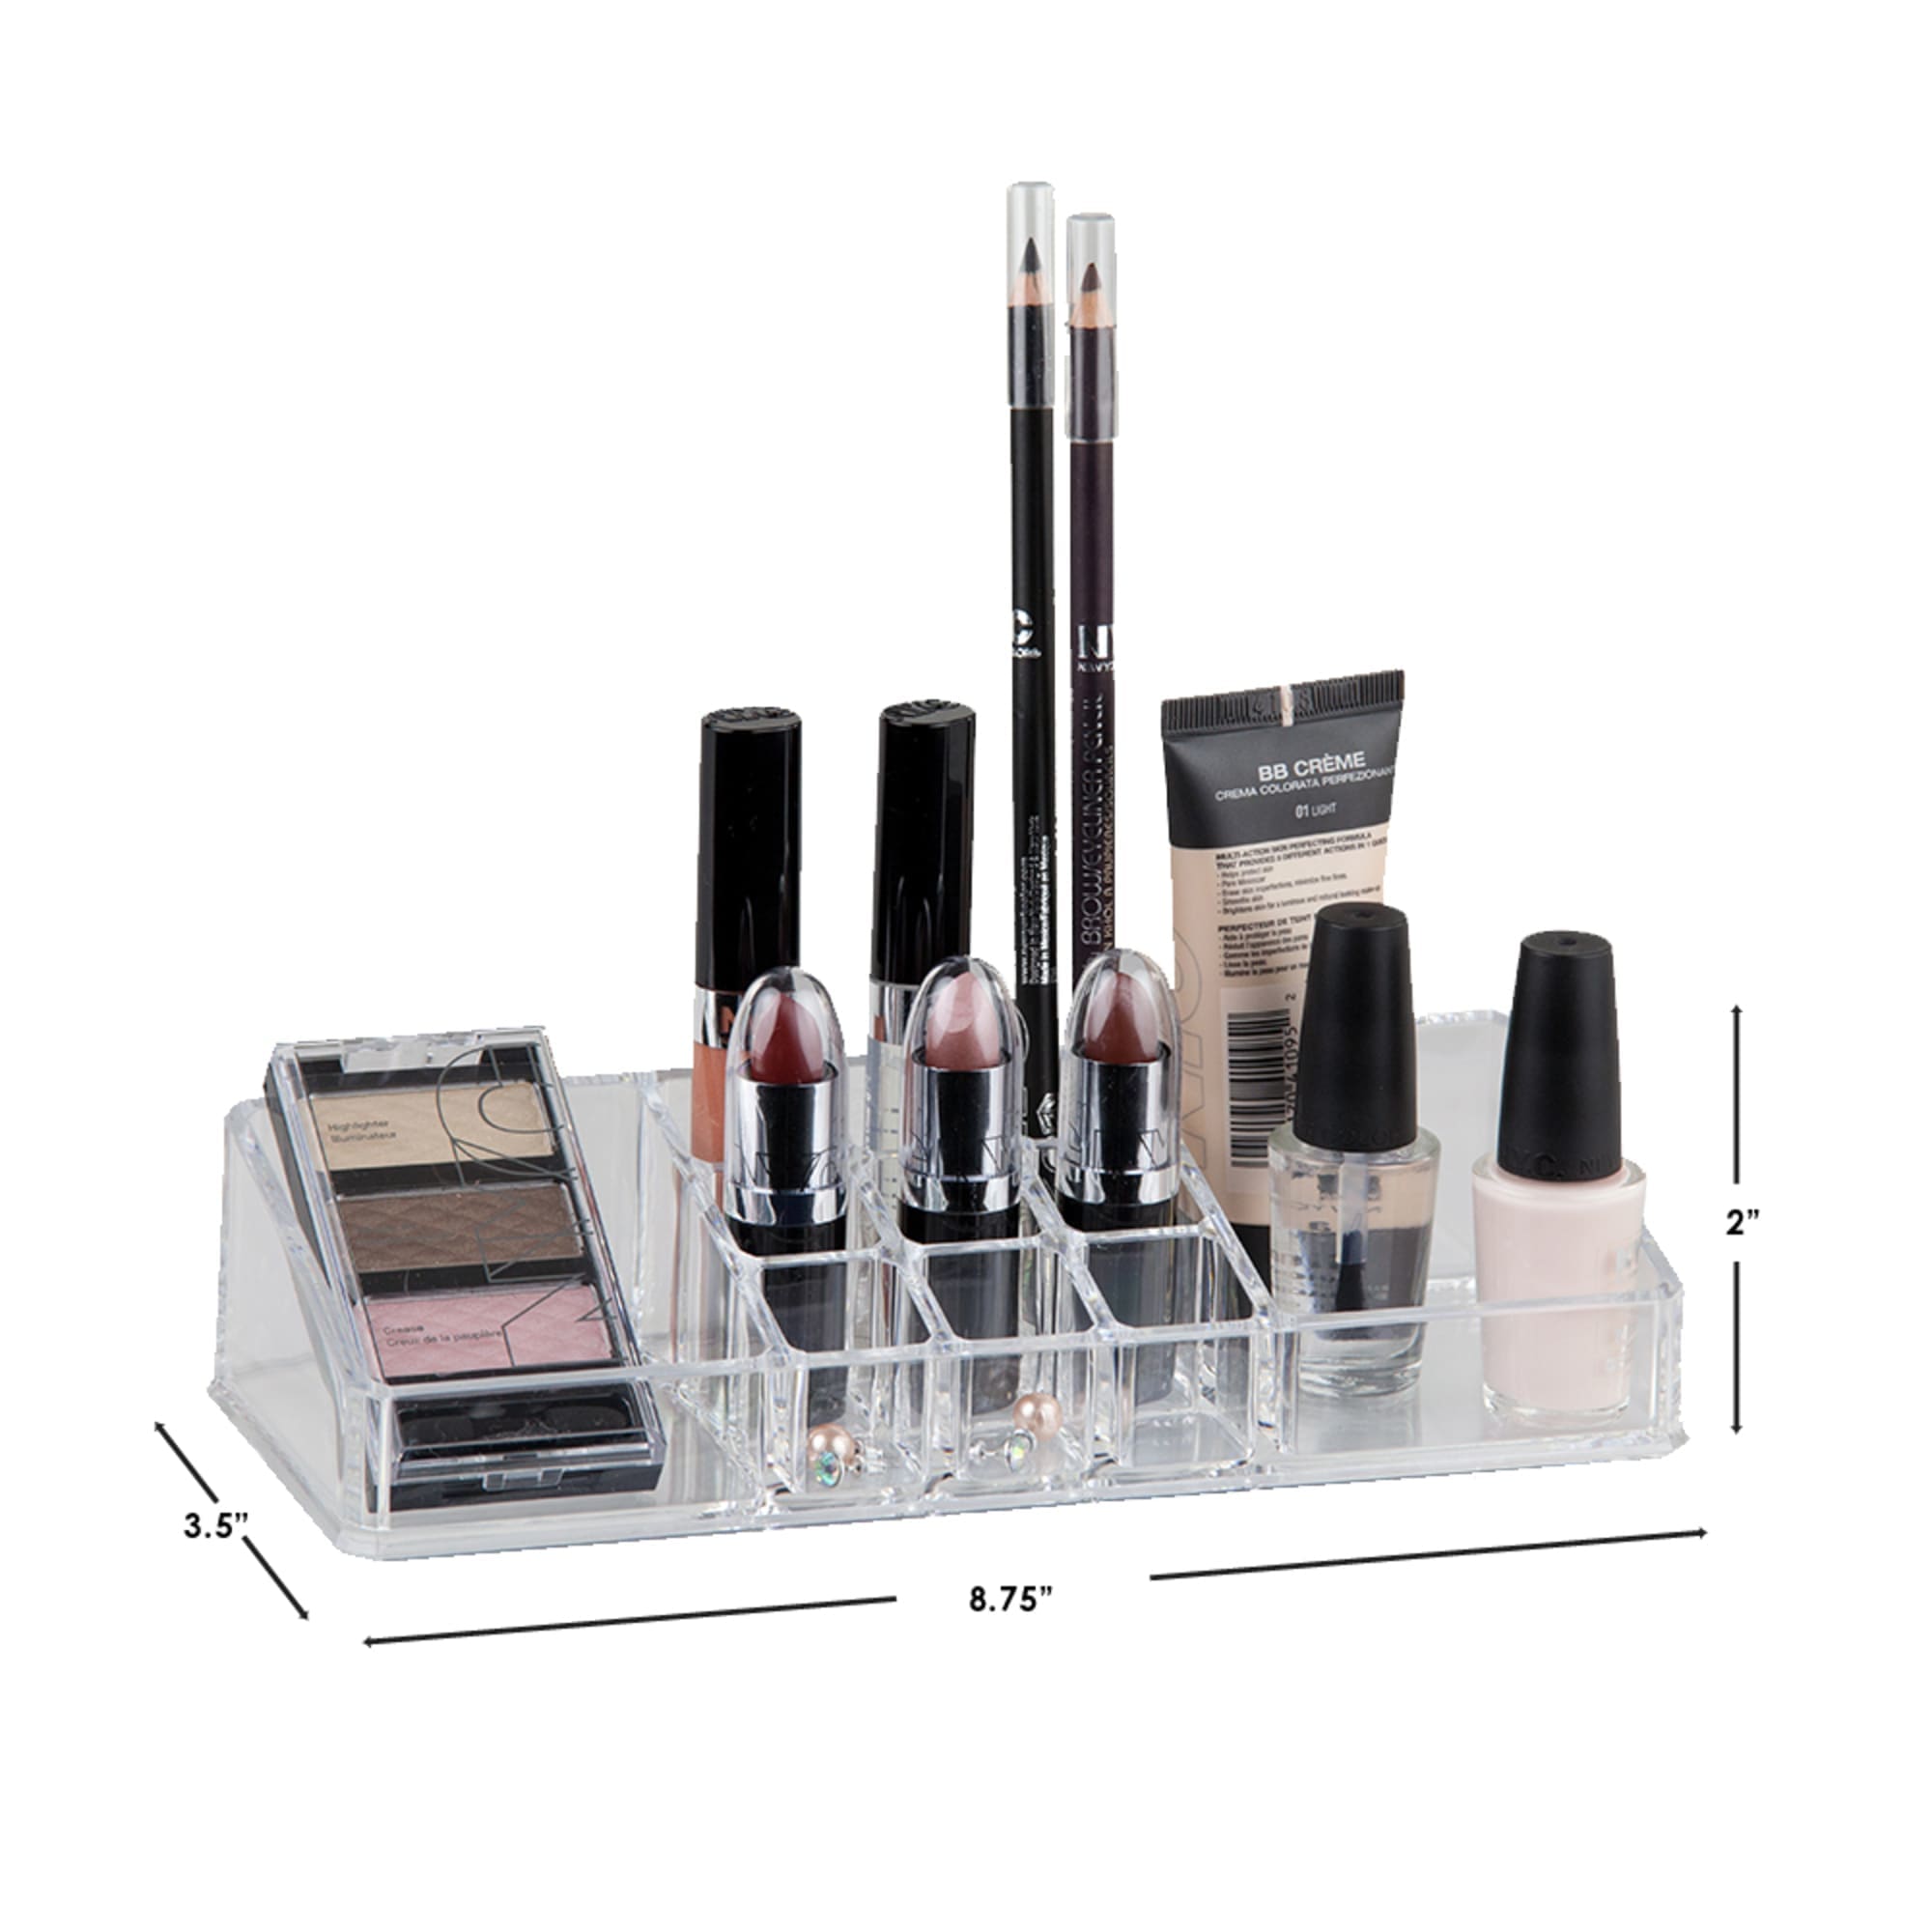 Home Basics Makeup Organizer, Clear $3.00 EACH, CASE PACK OF 12